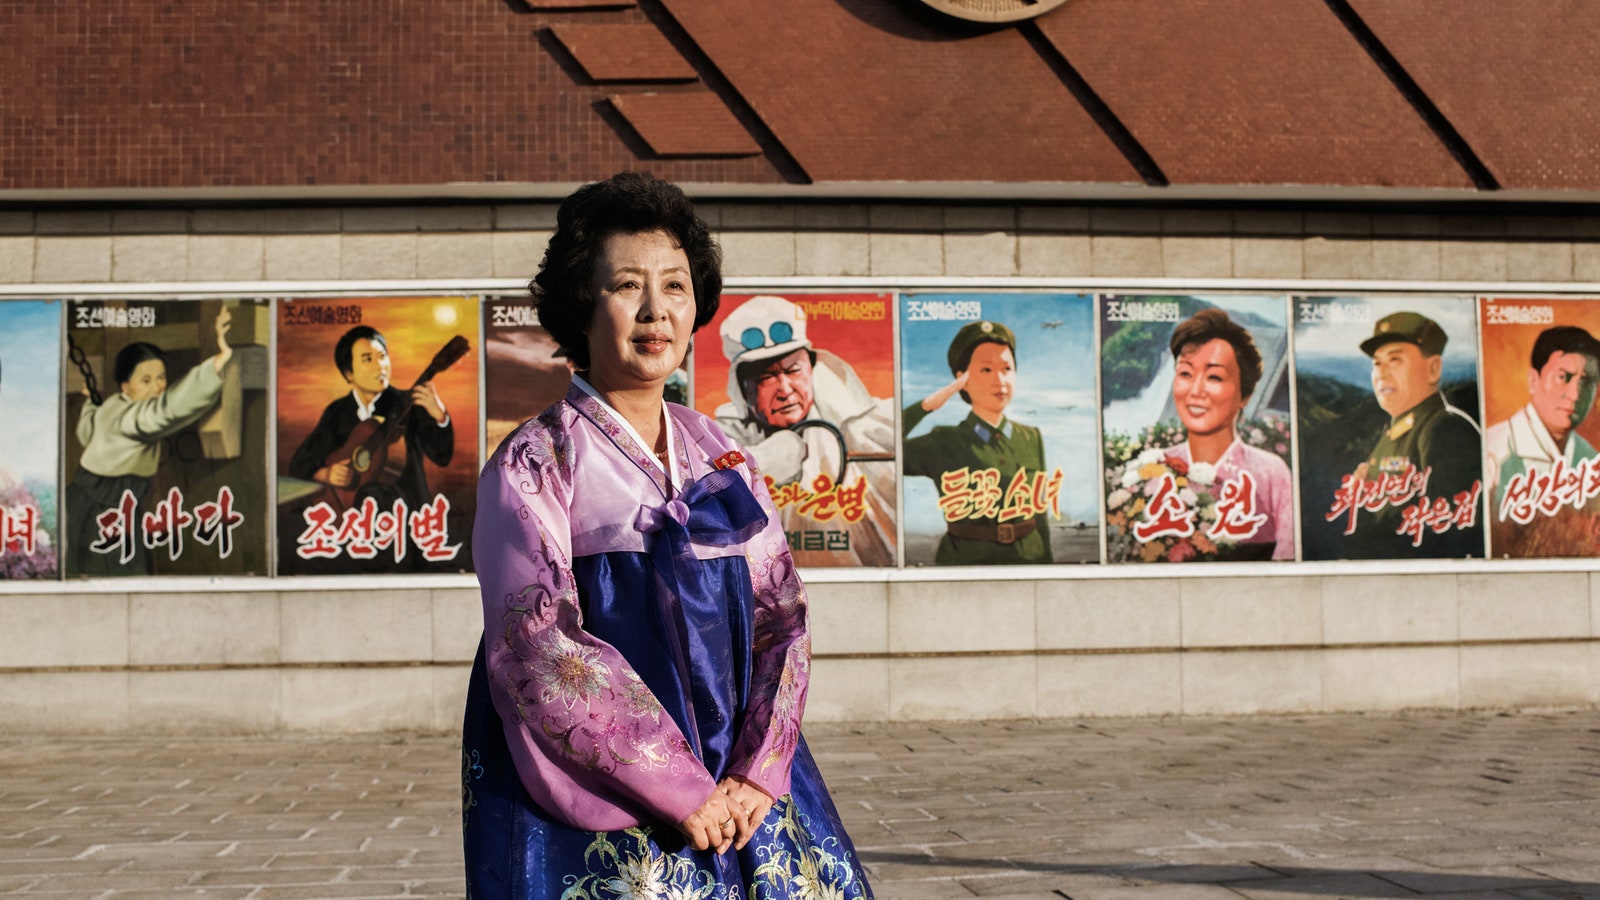 North Korea in Pictures: A Mind-Blowing Photo Gallery